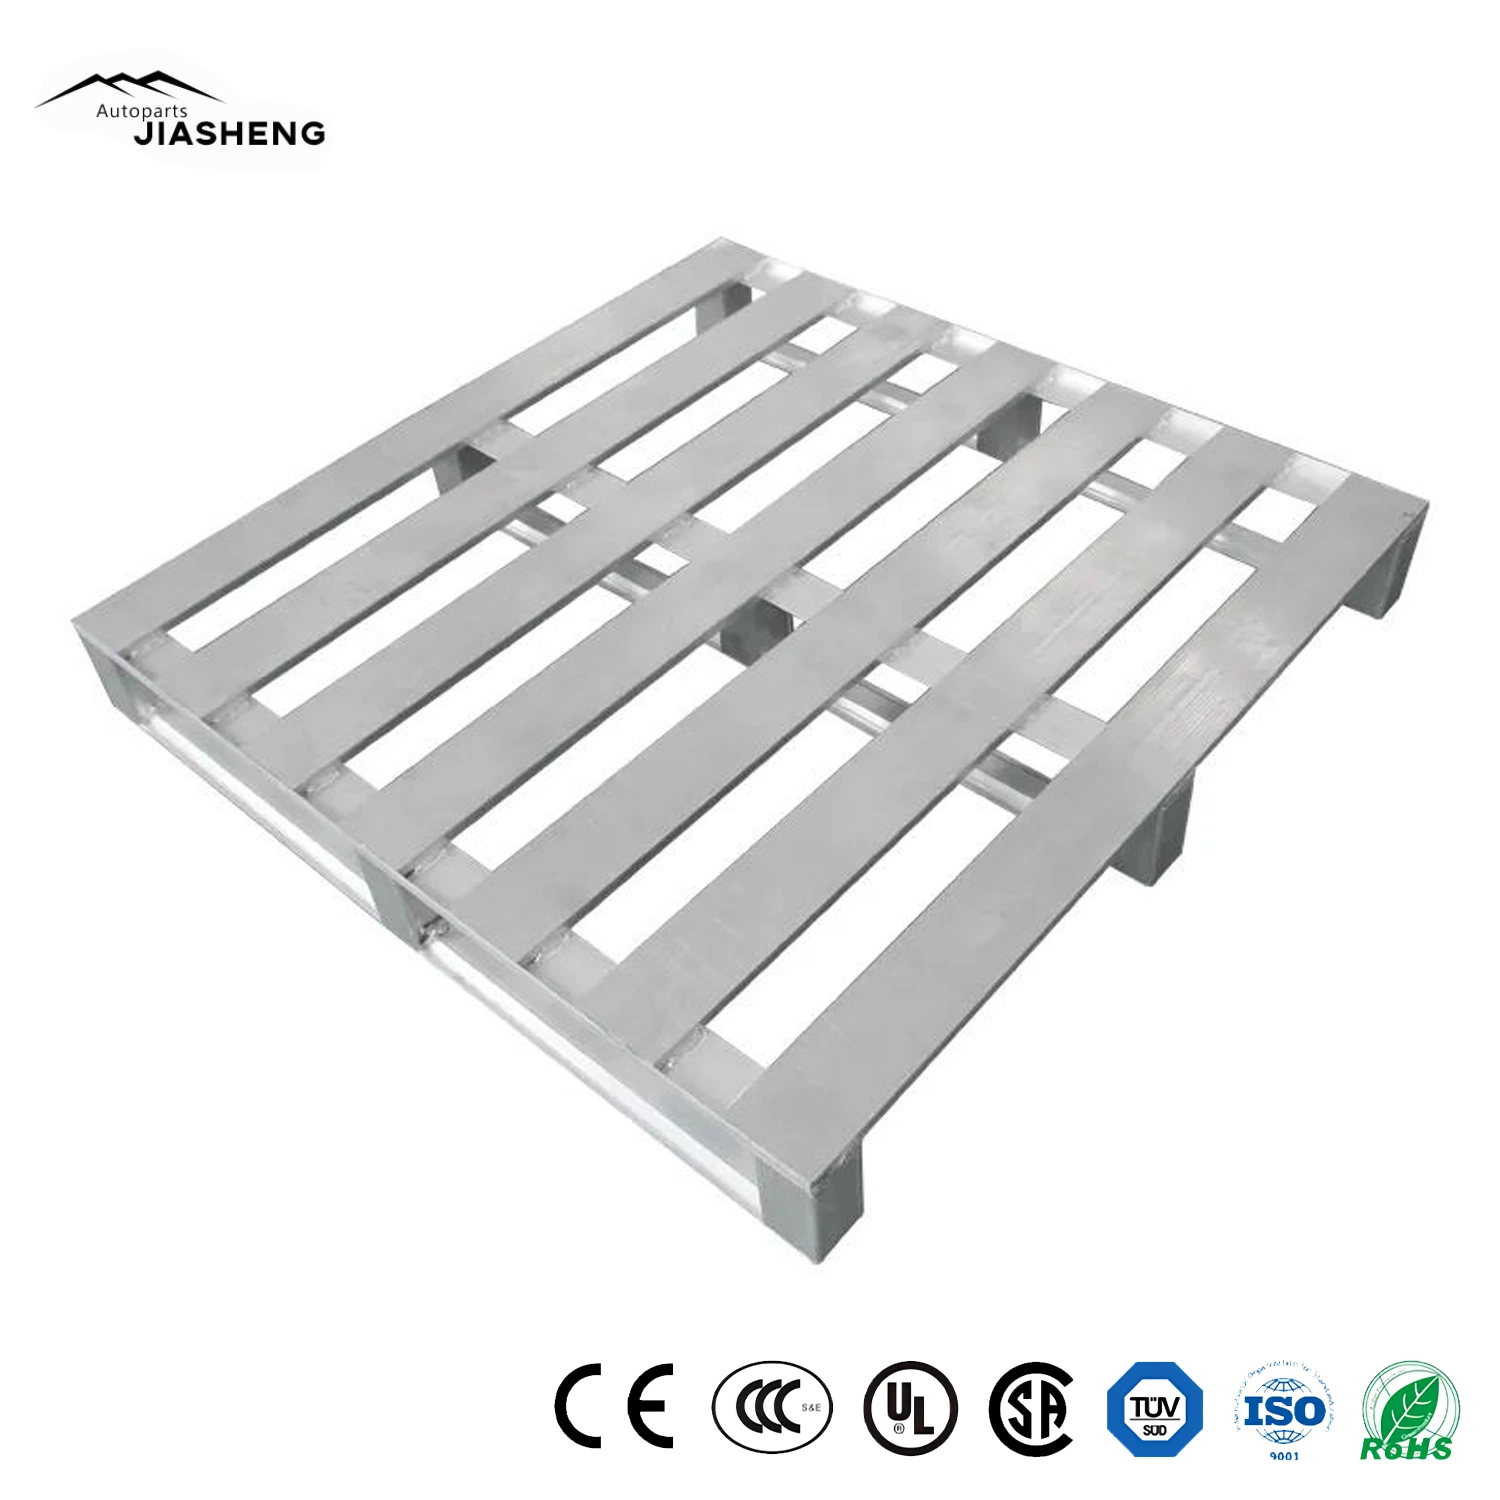 Aluminum Profile Pallet for Seafood Company Cold Storage Aluminum Steel Pallet Metal Tray China Supplier